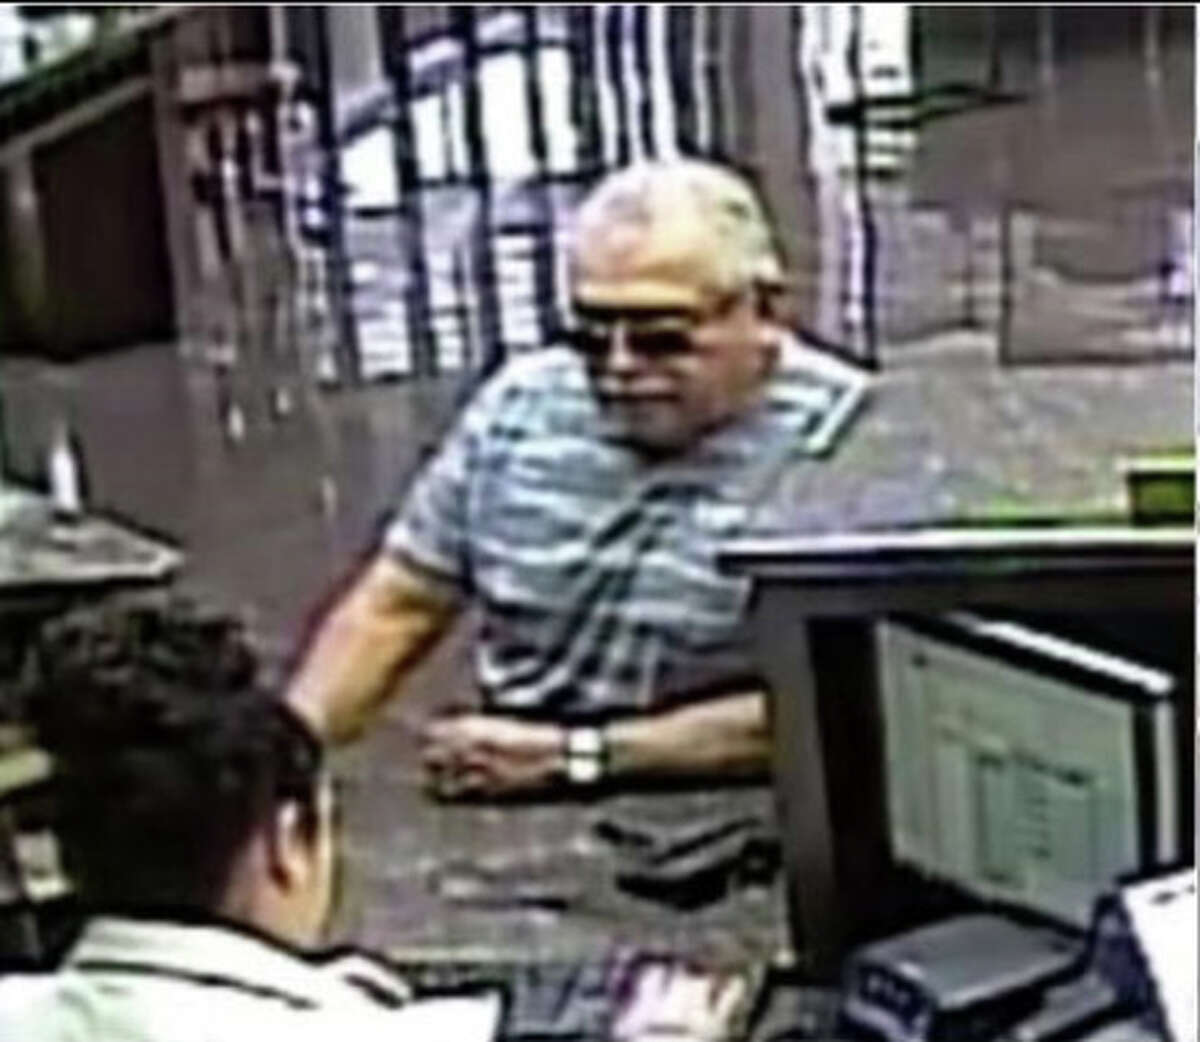 Authorities said this man is wanted for using a fictitious identification to cash multiple stolen and forged checks at a local bank.